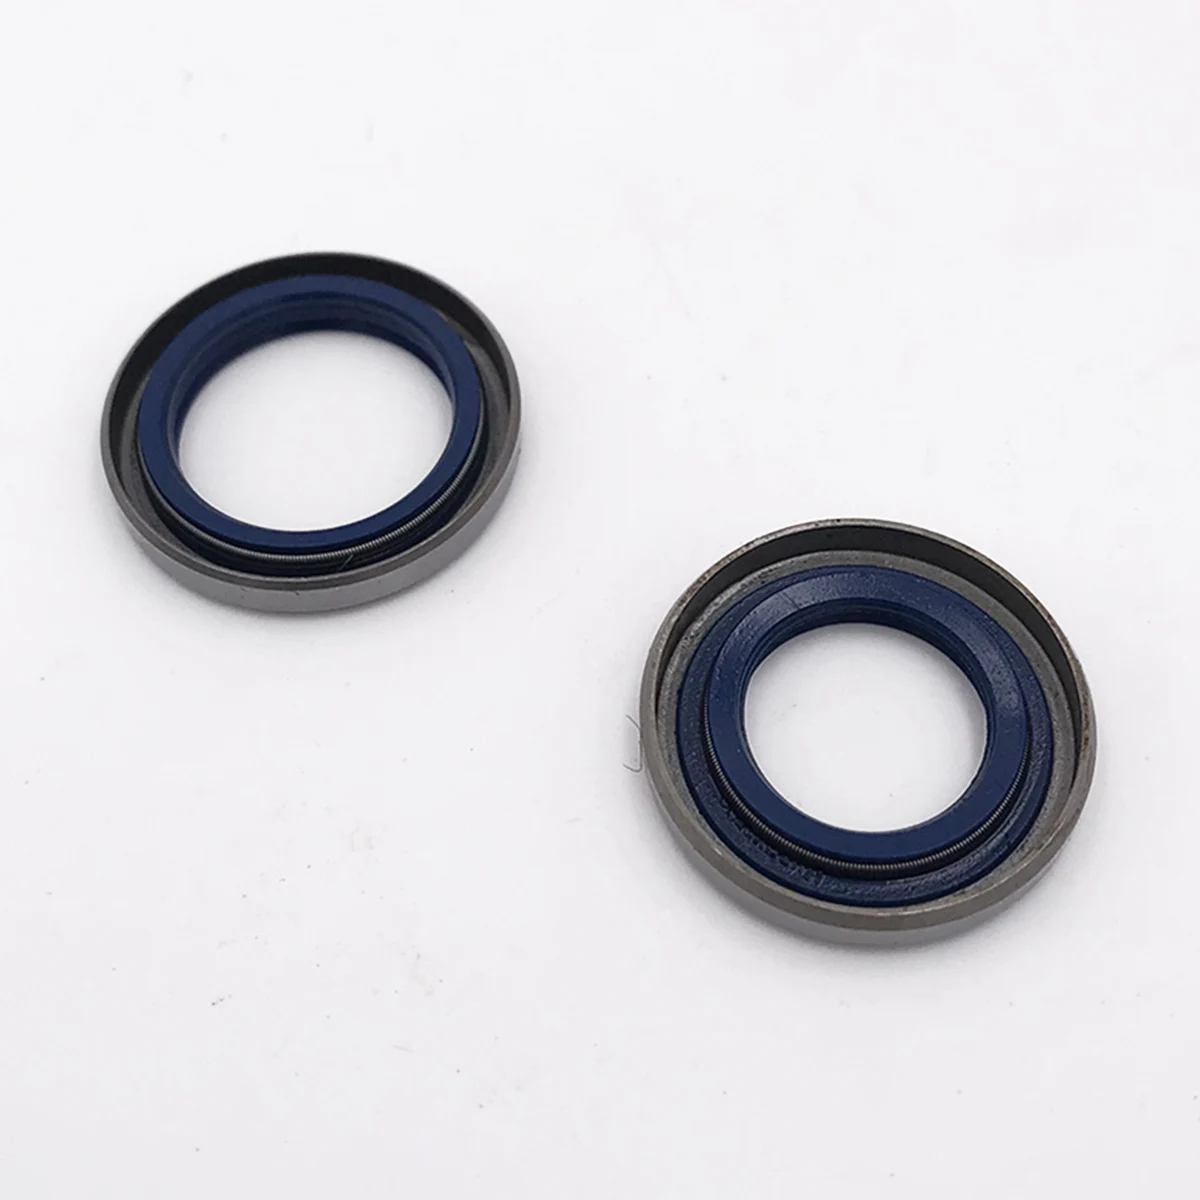 

2pcs Oil Seals For Husqvarna 40 365 371 357 359 51 55 257 262 254 XP Replacement Oil Seals Chainsaw Parts For Home Garden Tool